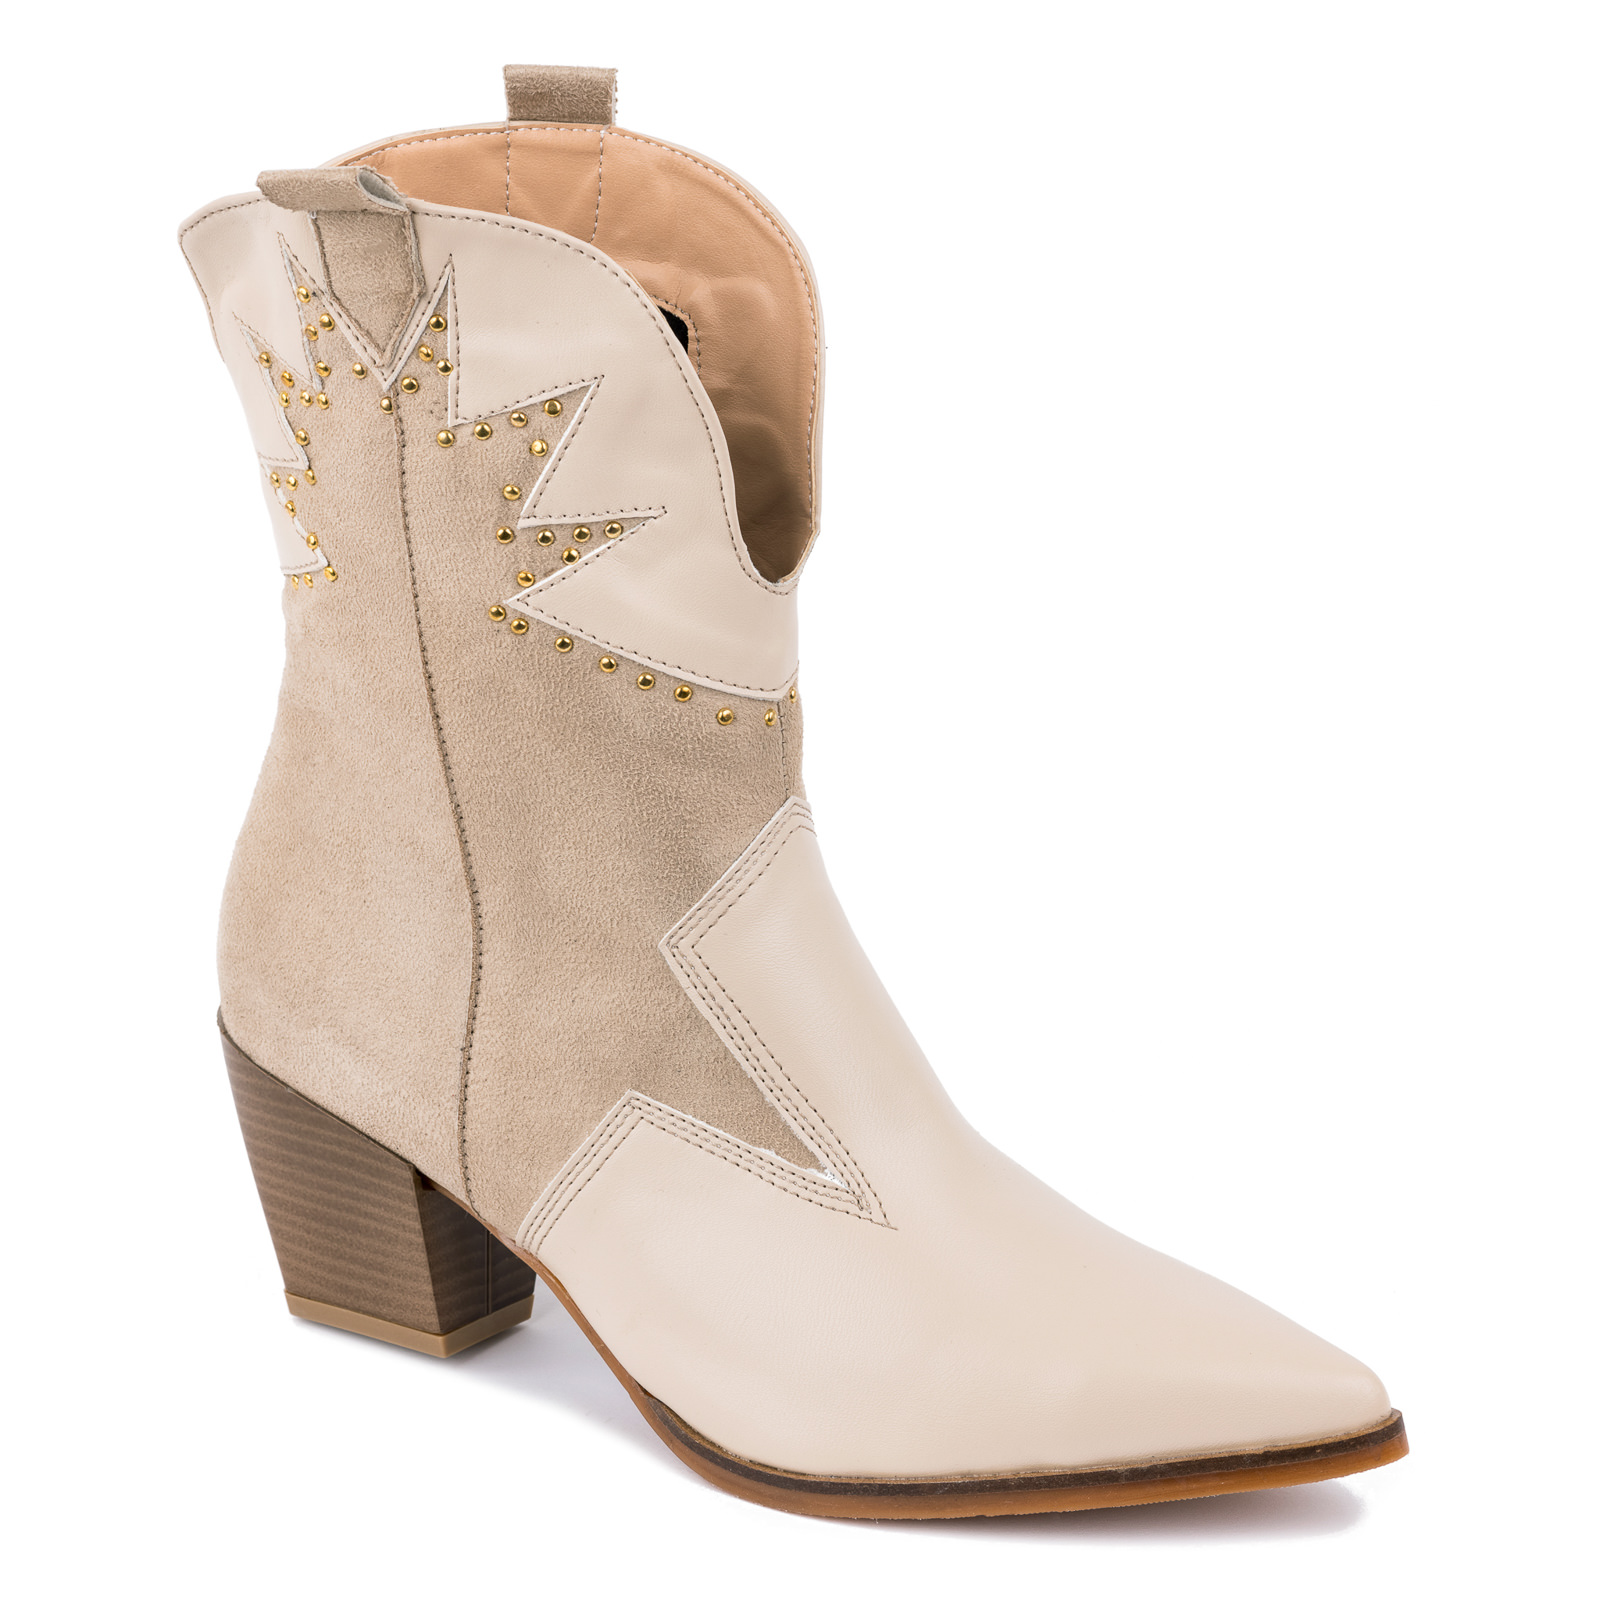 POINTED COWGIRL ANKLE BOOTS WITH RIVETS - BEIGE